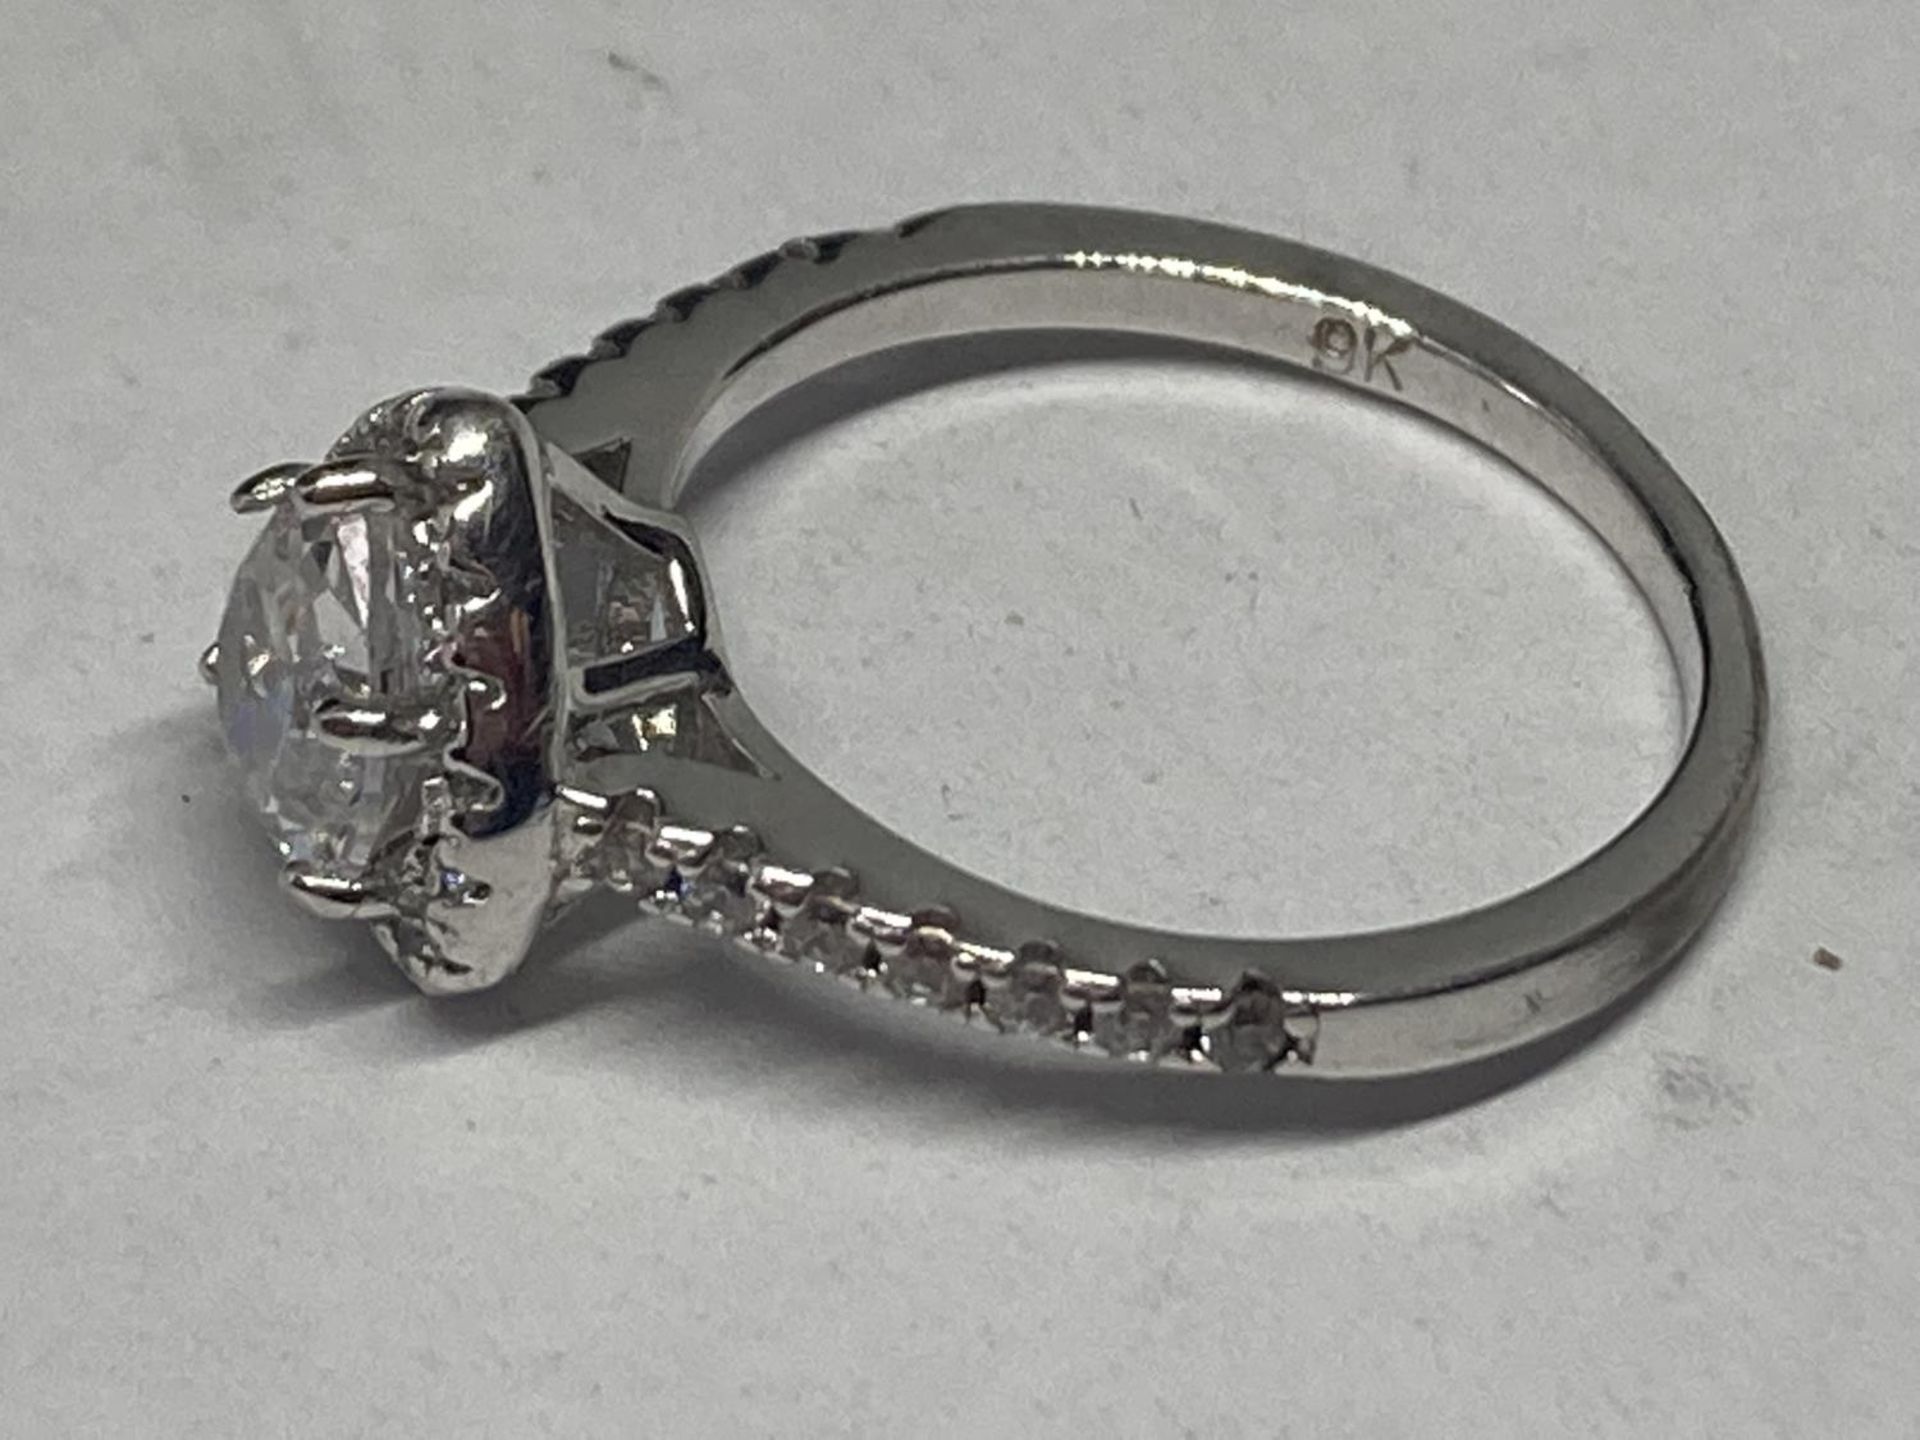 A MARKED 9K RING WITH 1 CARAT OF MOISSANITE IN A HEART DESIGN SIZE L/M GROSS WEIGHT 2.98 GRAMS - Image 3 of 4